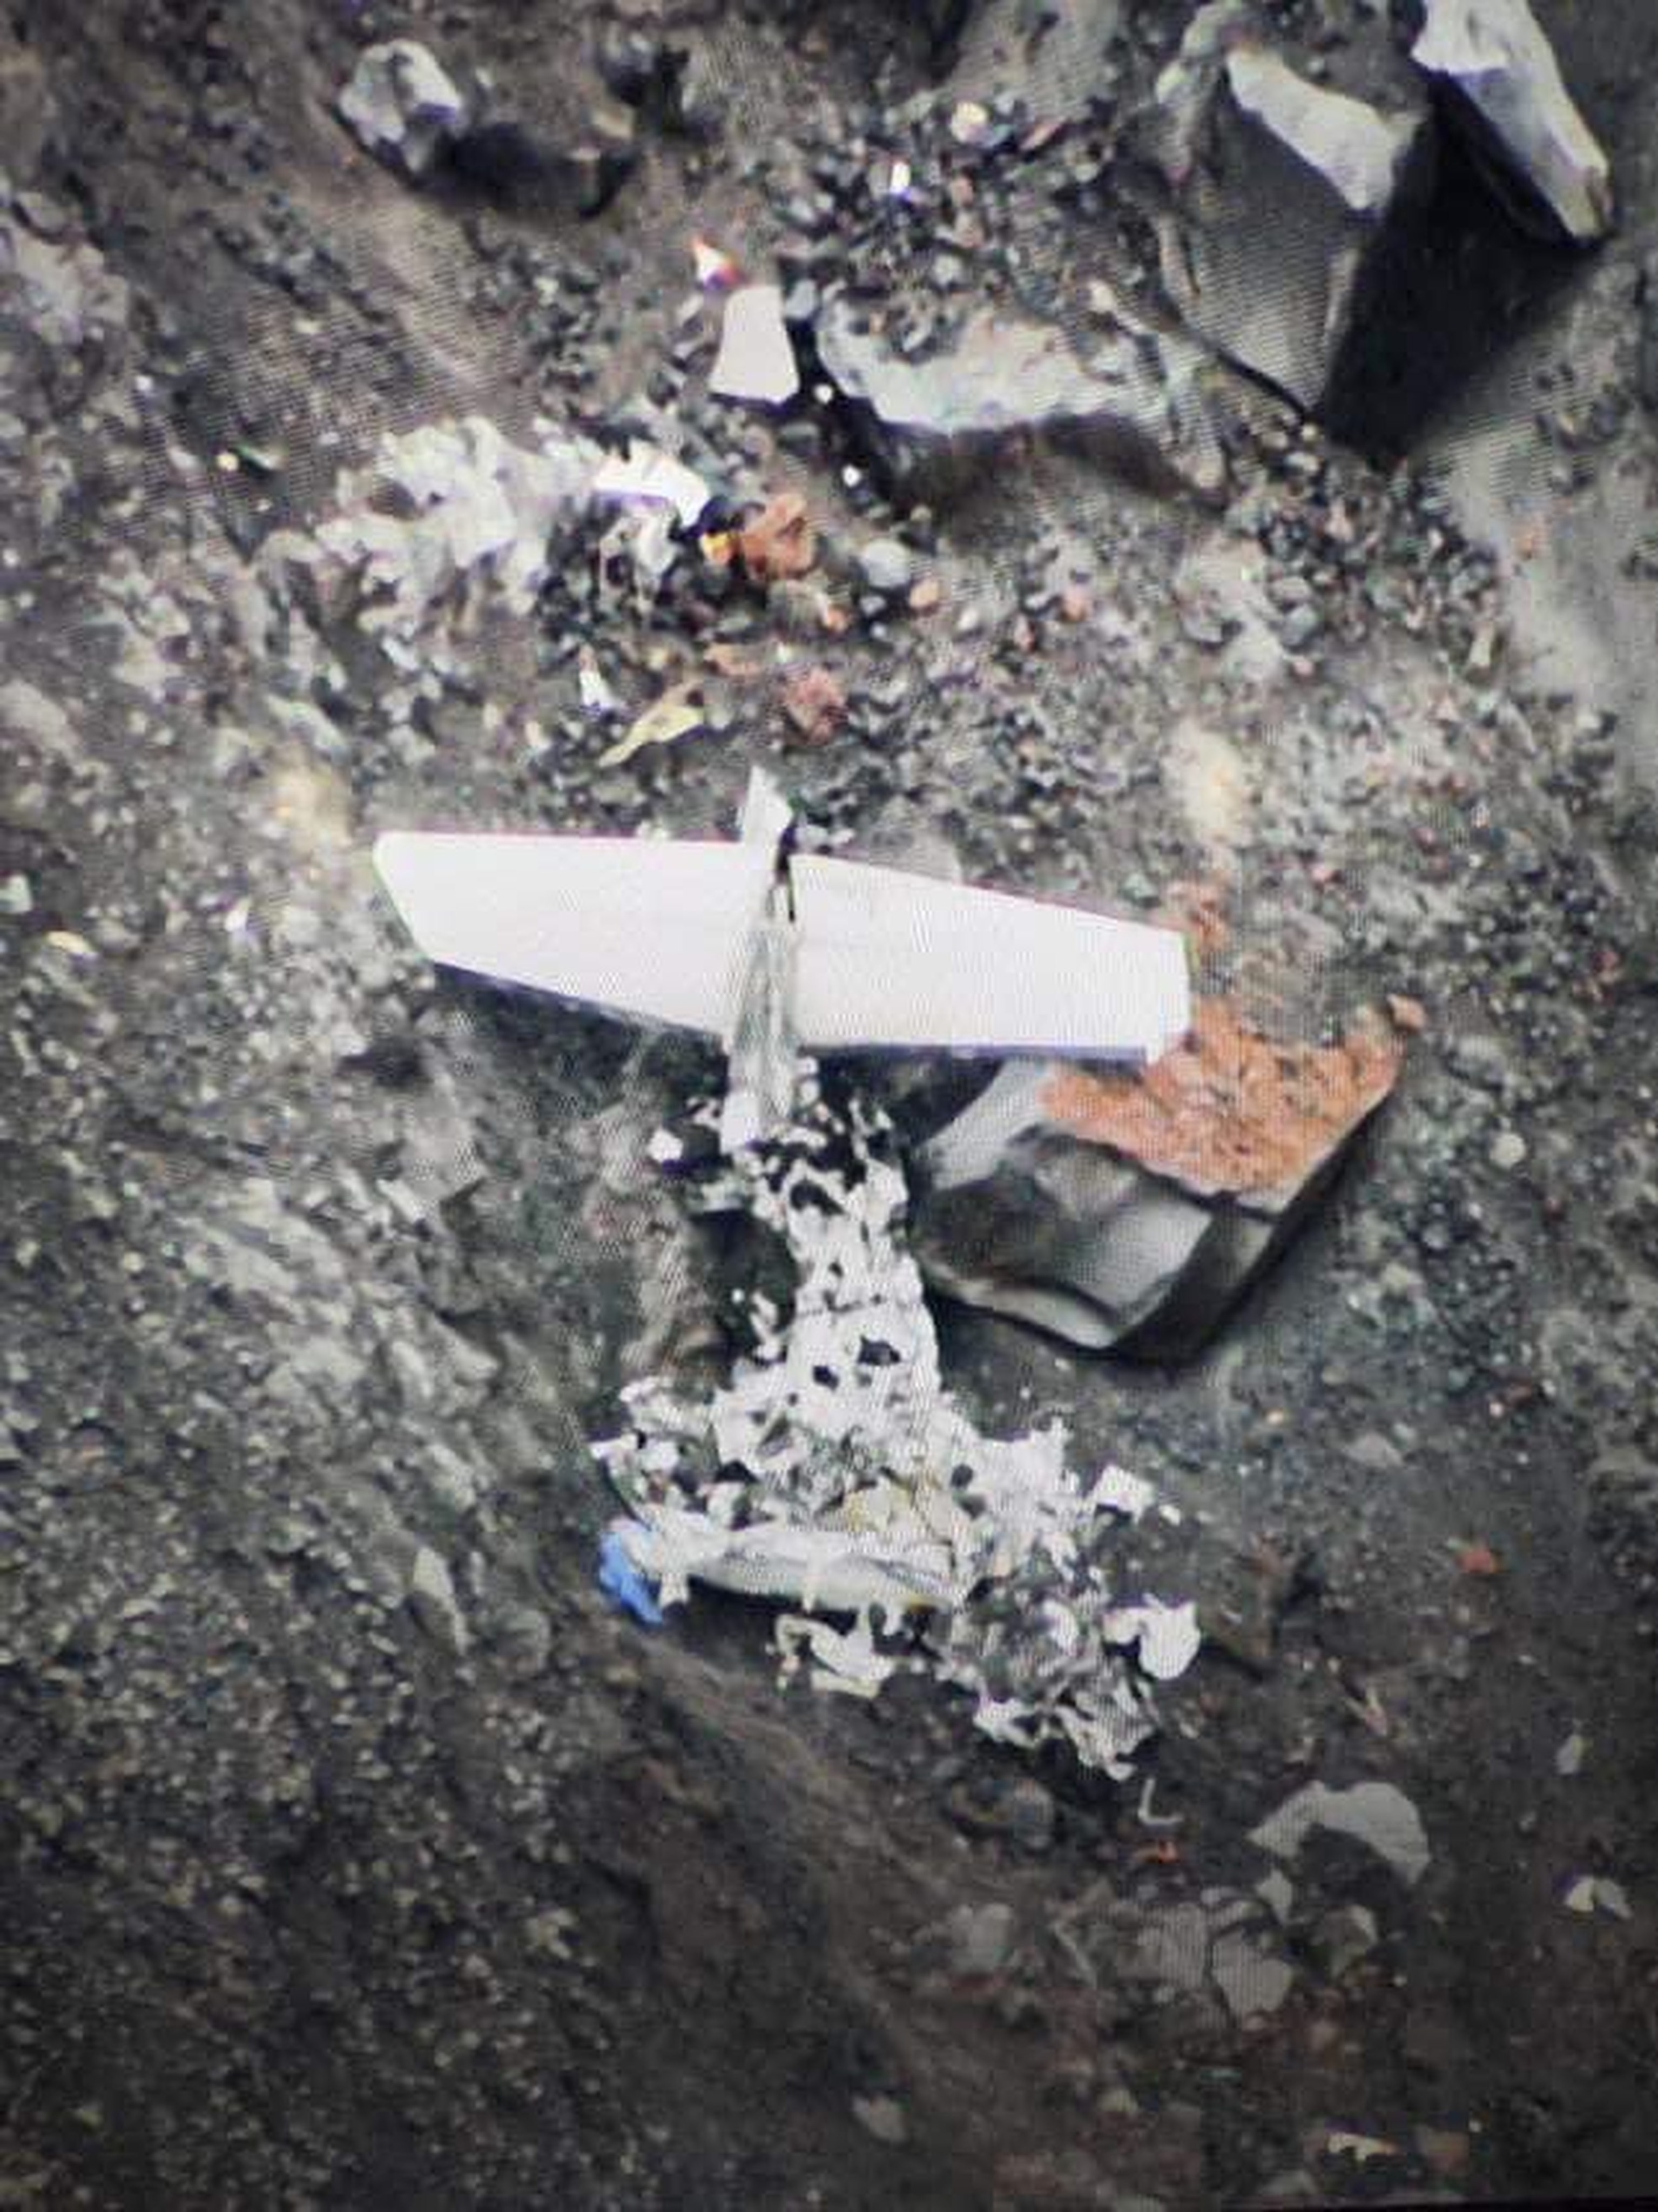 An image shared by Filipino Congressman Joey Salceda that purportedly shows the crash site of the missing Cessna plane on Mount Mayon. Photo: Facebook/Joey Salceda